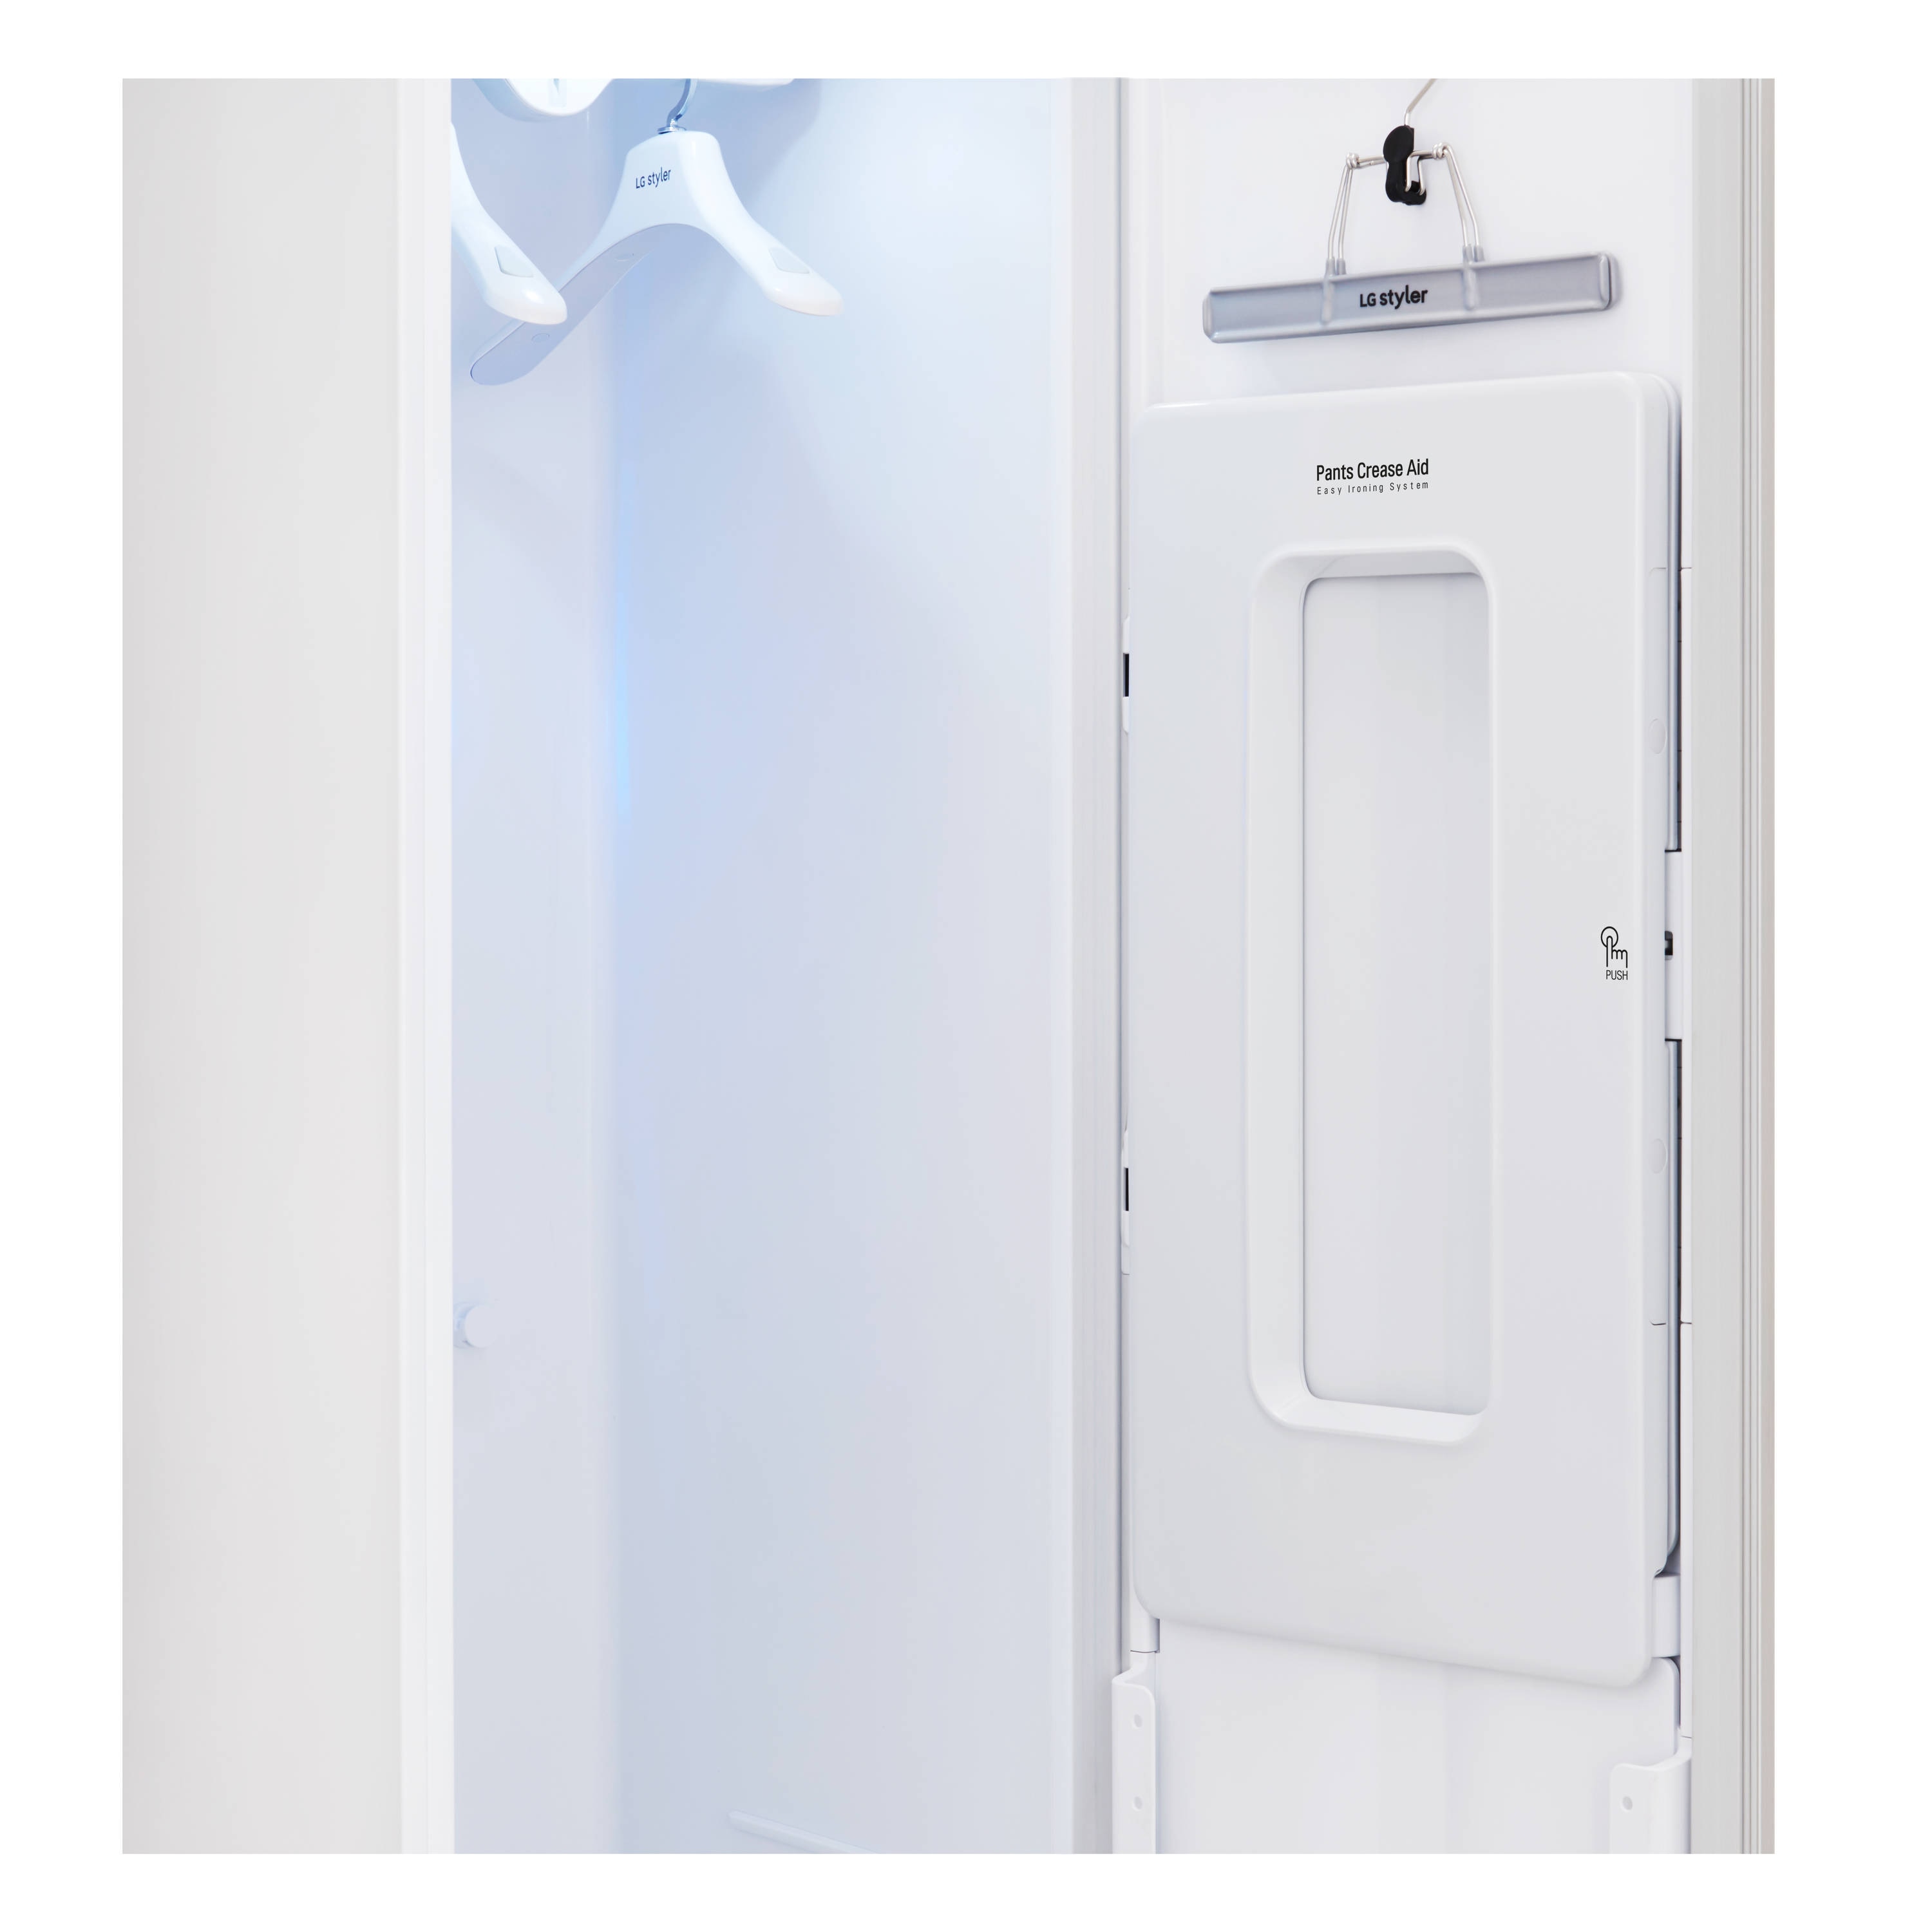 LG Lg STYLER SMART WI-FI ENABLED STEAM CLOSET WITH TRUESTEAM TECHNOLOGY AND  EXCLUSIVE MOVING HANGERS - N/A - On Sale - Bed Bath & Beyond - 38405795